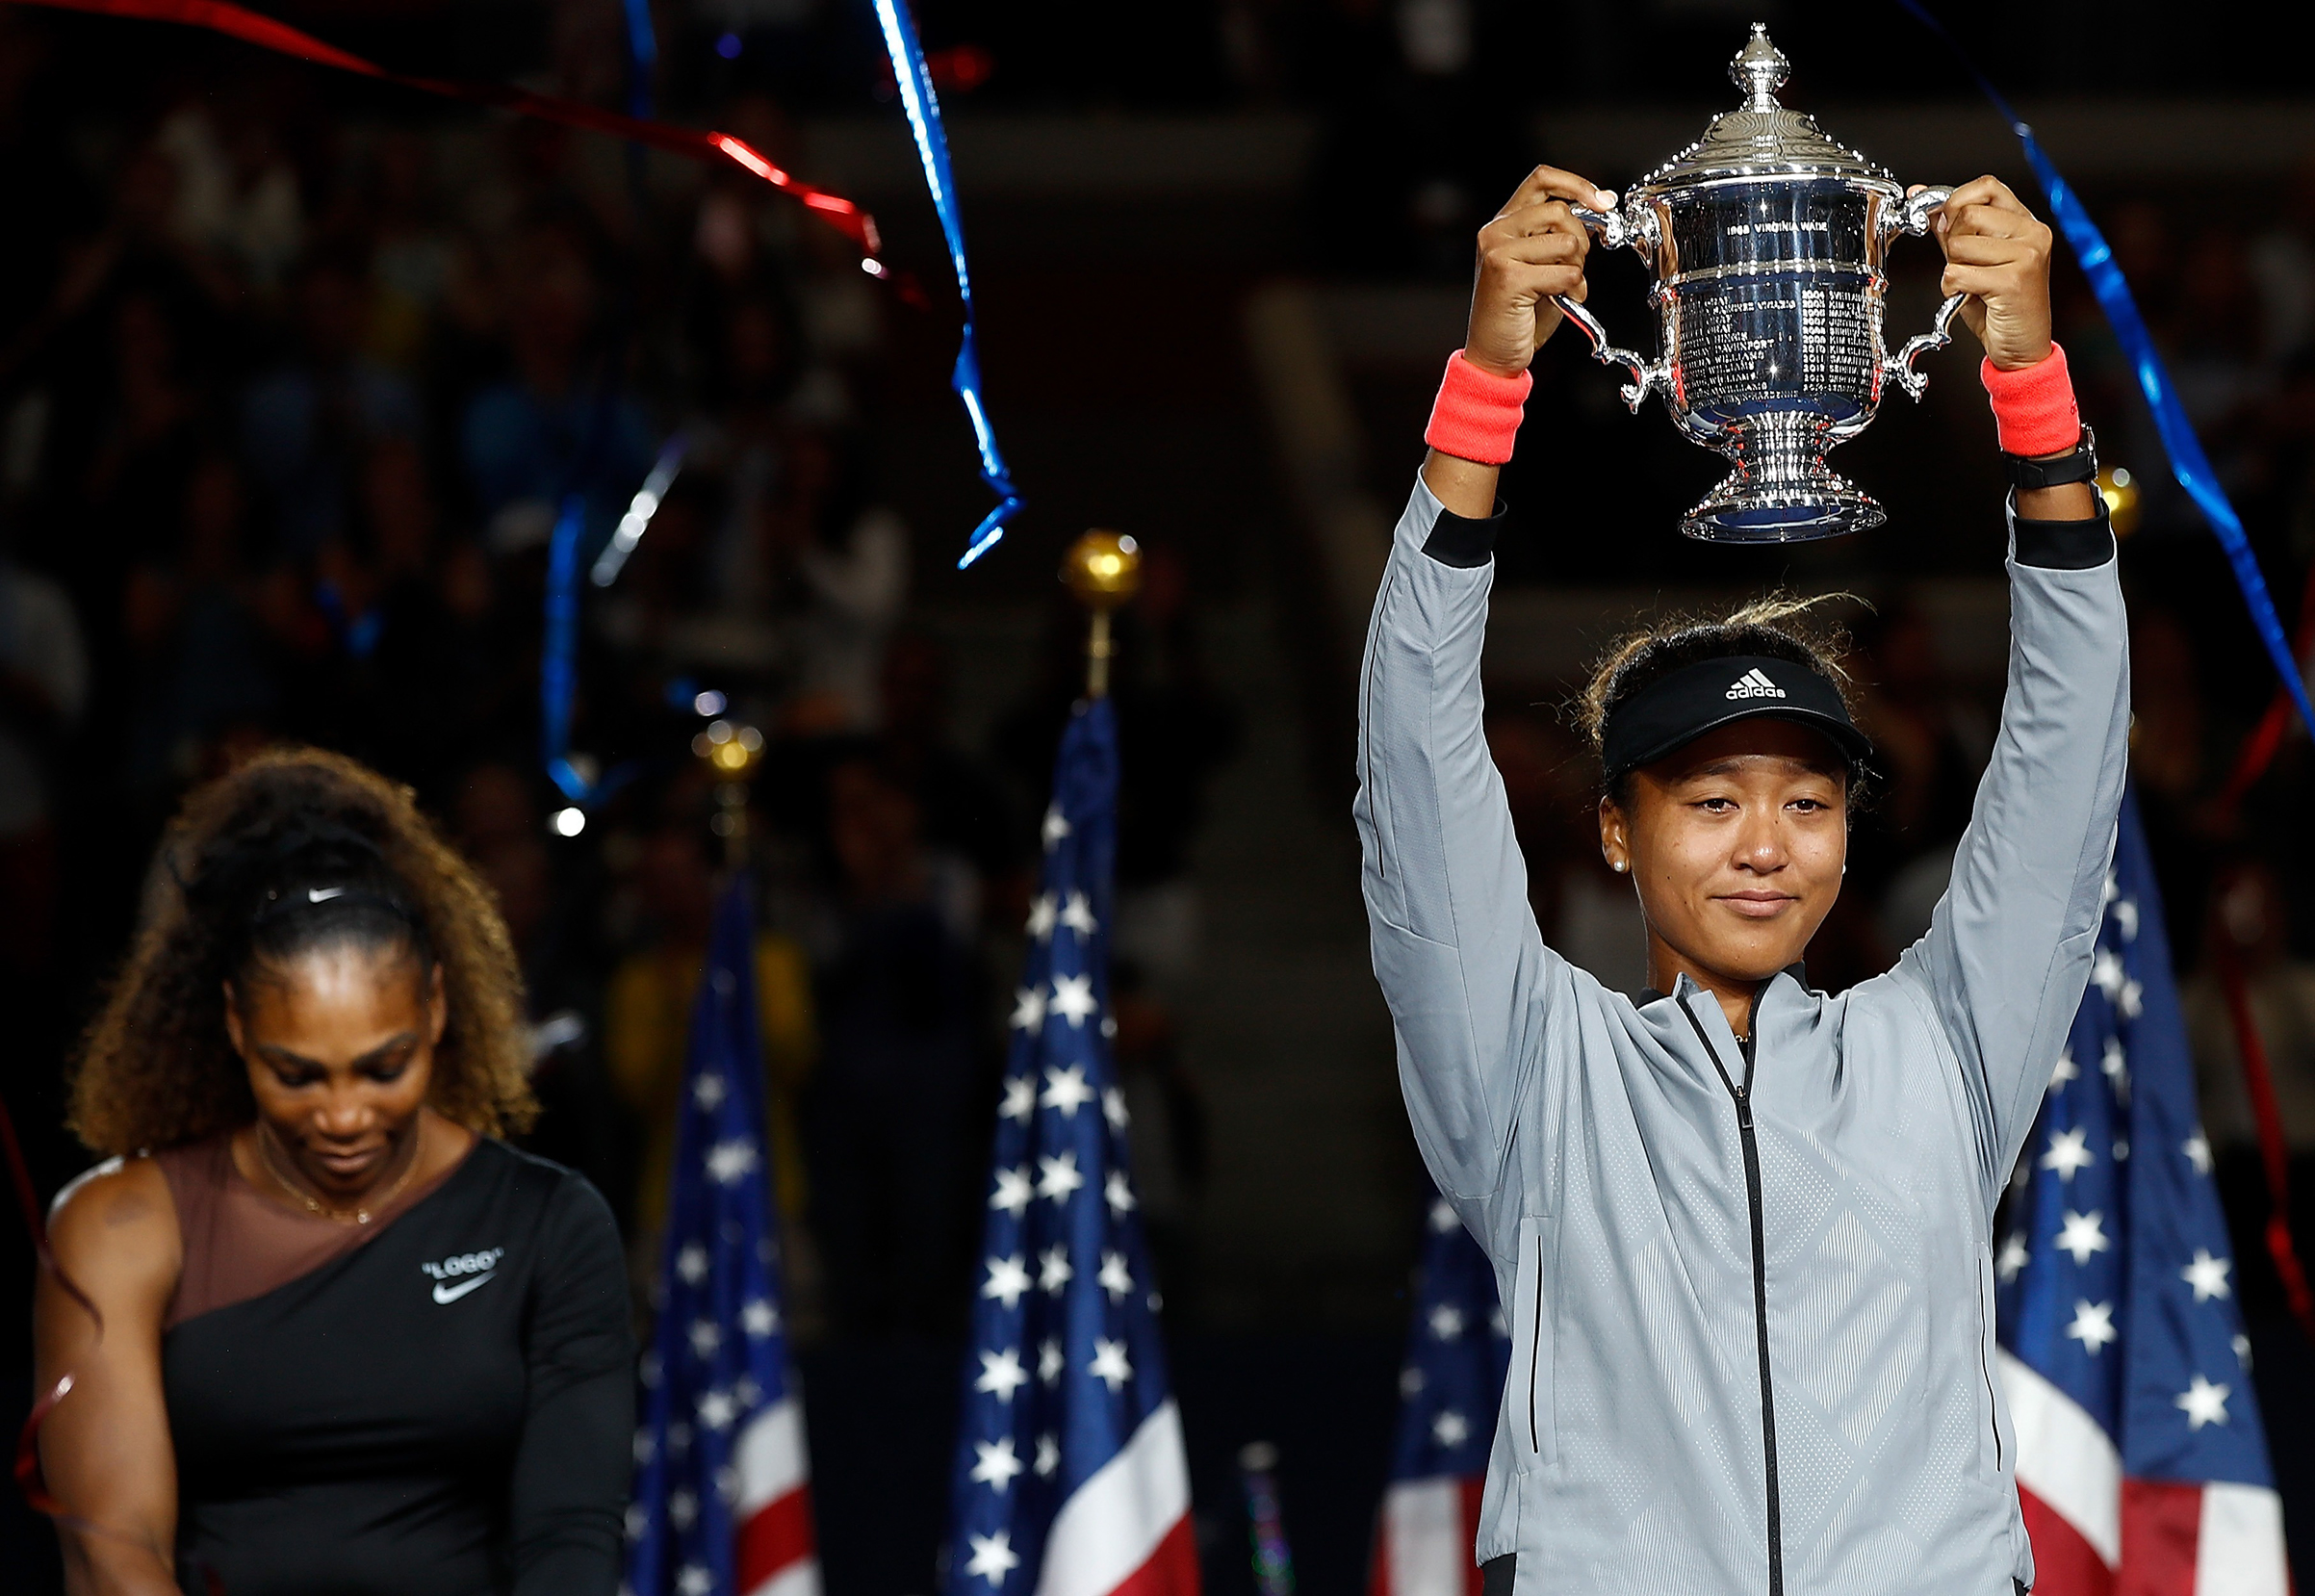 At the U.S. Open trophy ceremony, Osaka apologized to booing fans for beating her idol, Serena Williams (Julian Finney—Getty Images)